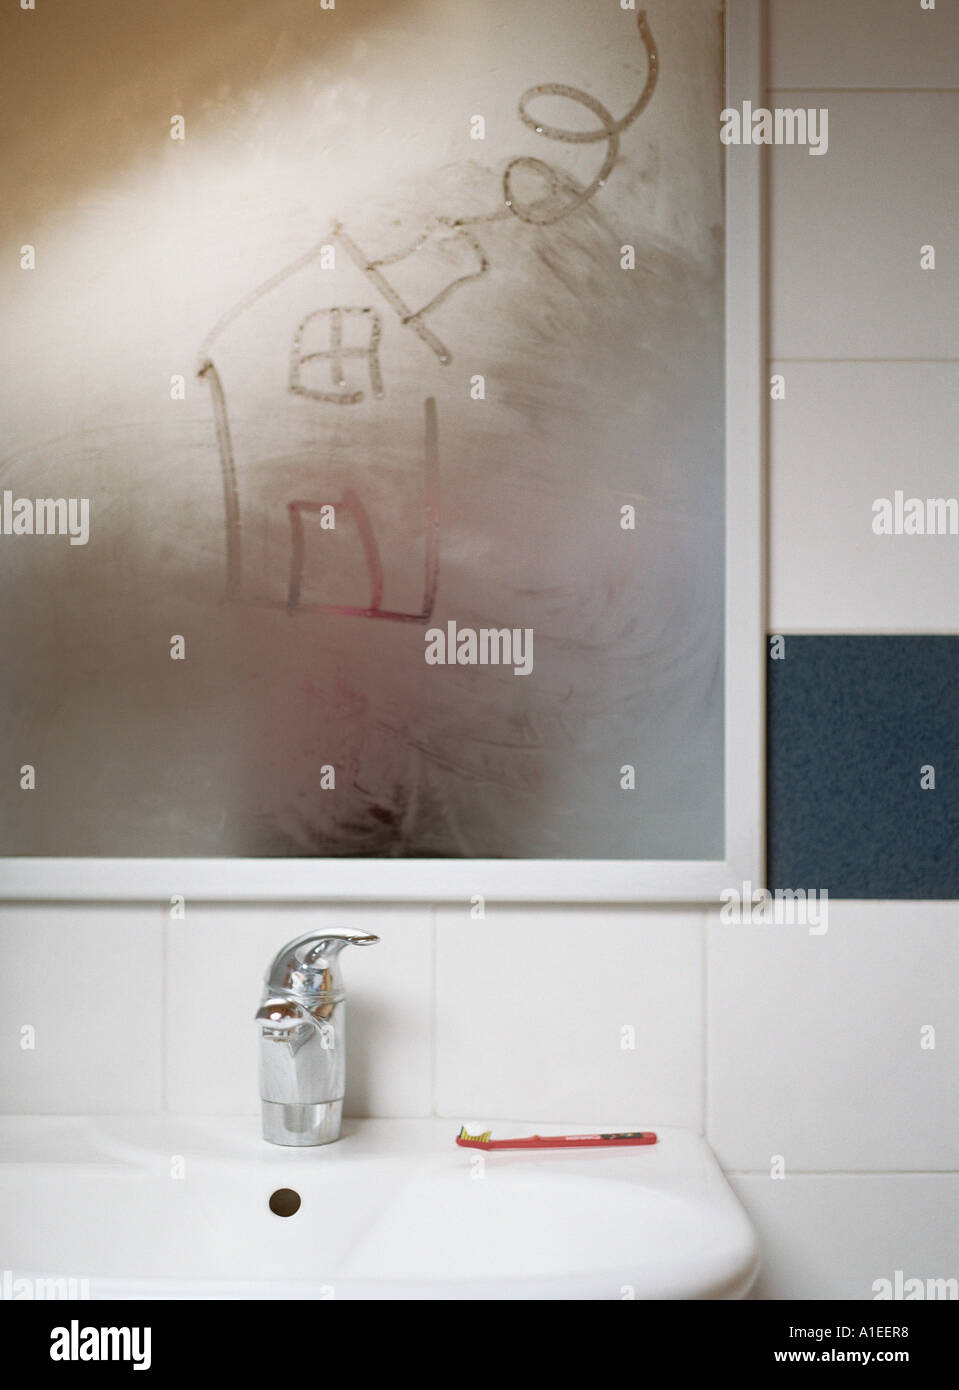 House drawn in condensation on bathroom mirror Stock Photo